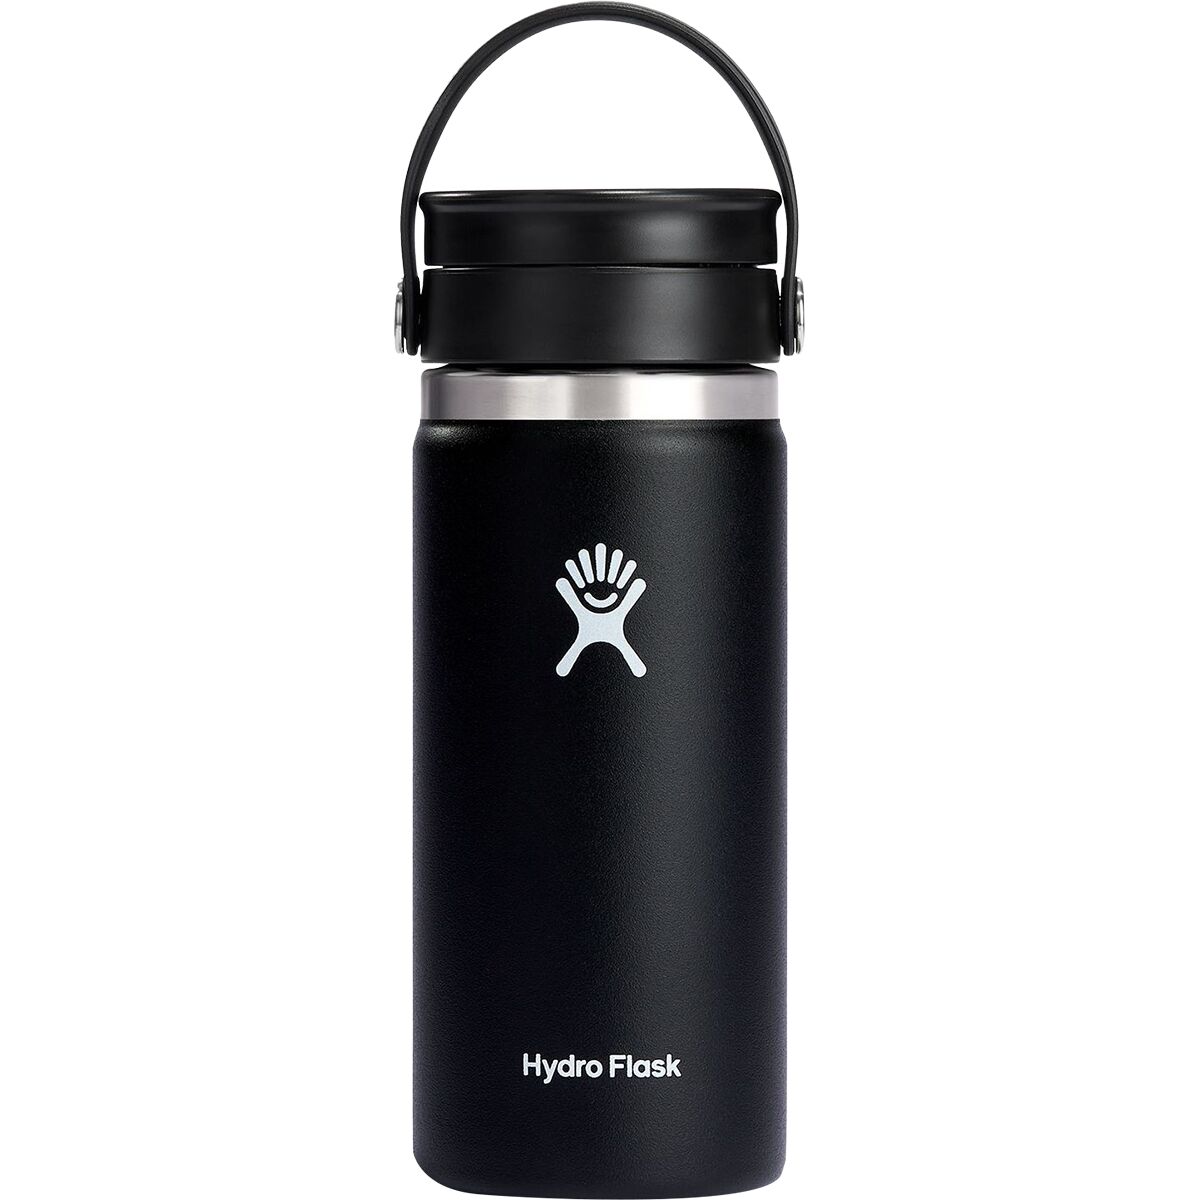 Photos - Other goods for tourism Hydro Flask 16oz Wide Mouth Flex Sip Coffee Mug 